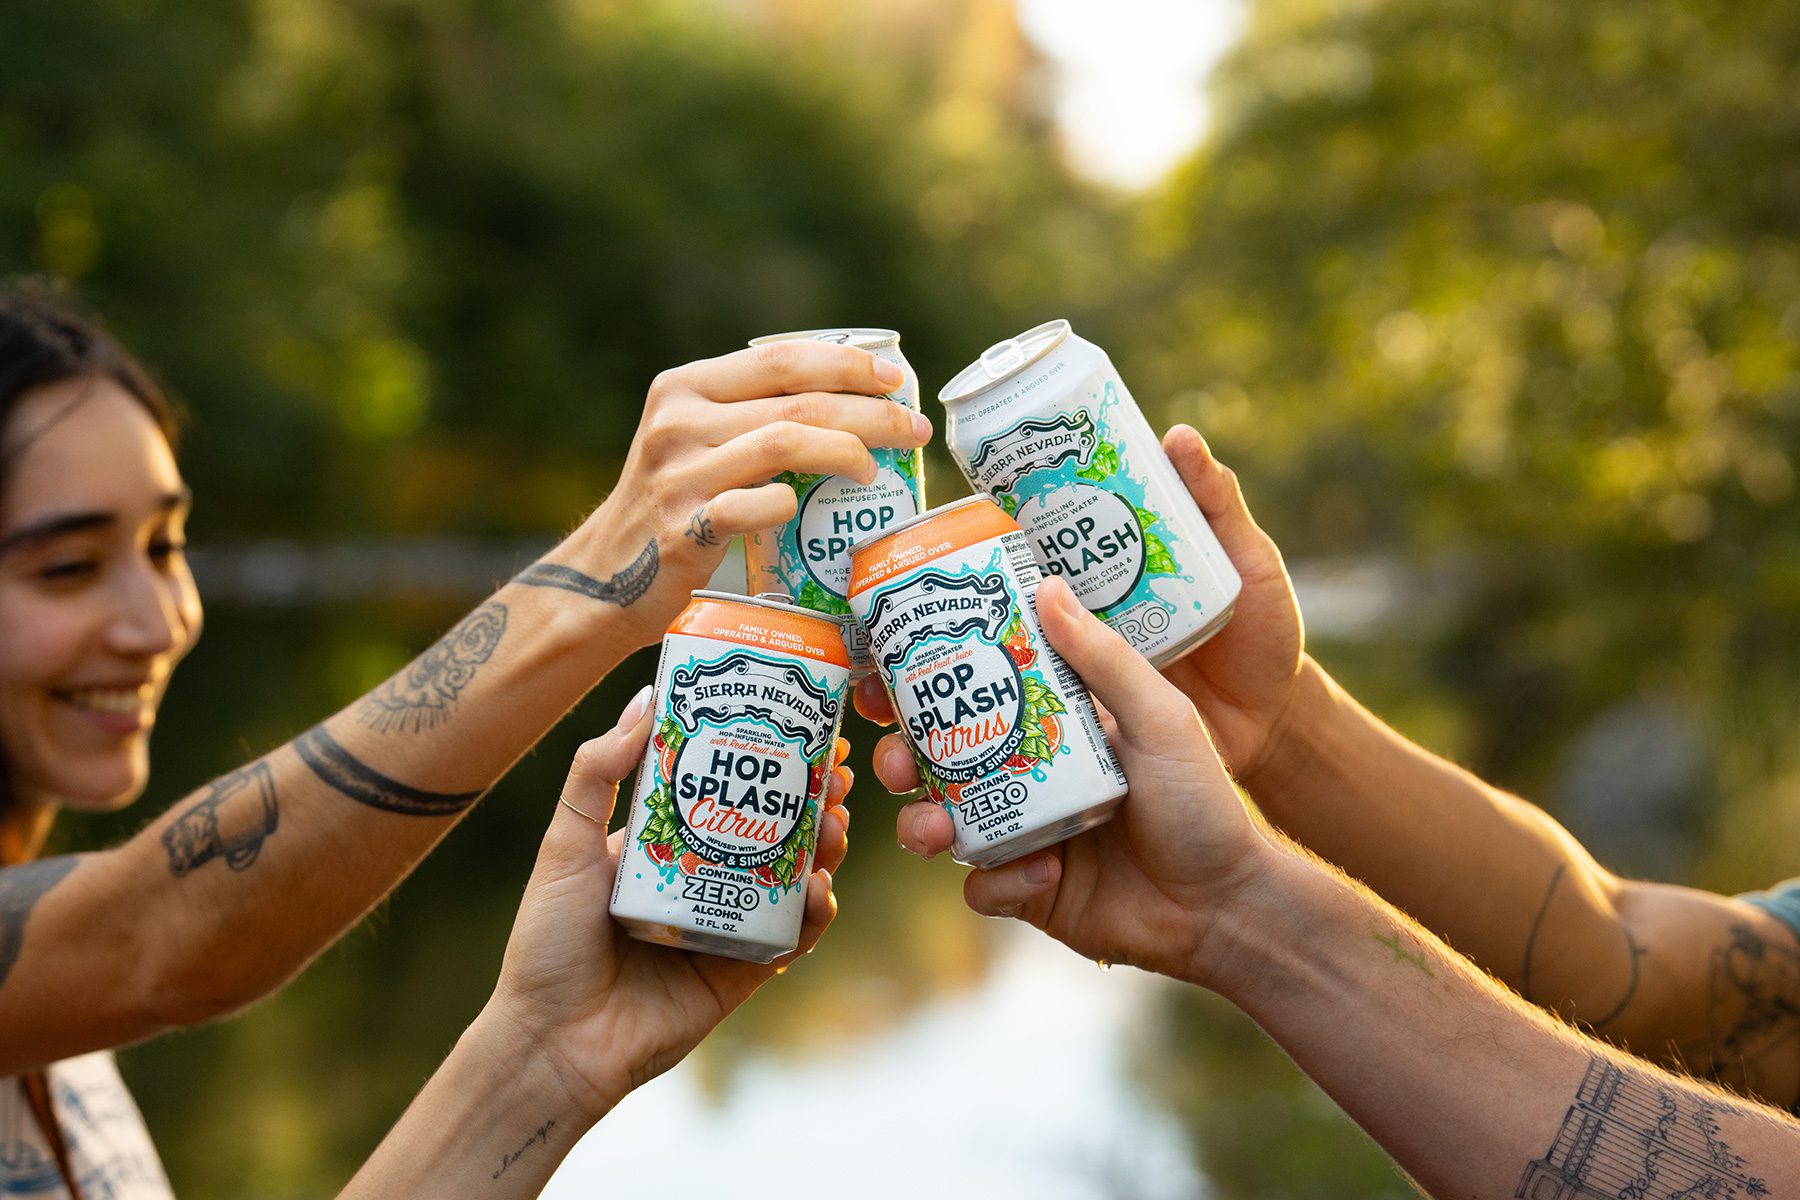 Four friends by a creek holding up cans of Sierra Nevada hop water: Hop Splash and Hop Splash Citrus